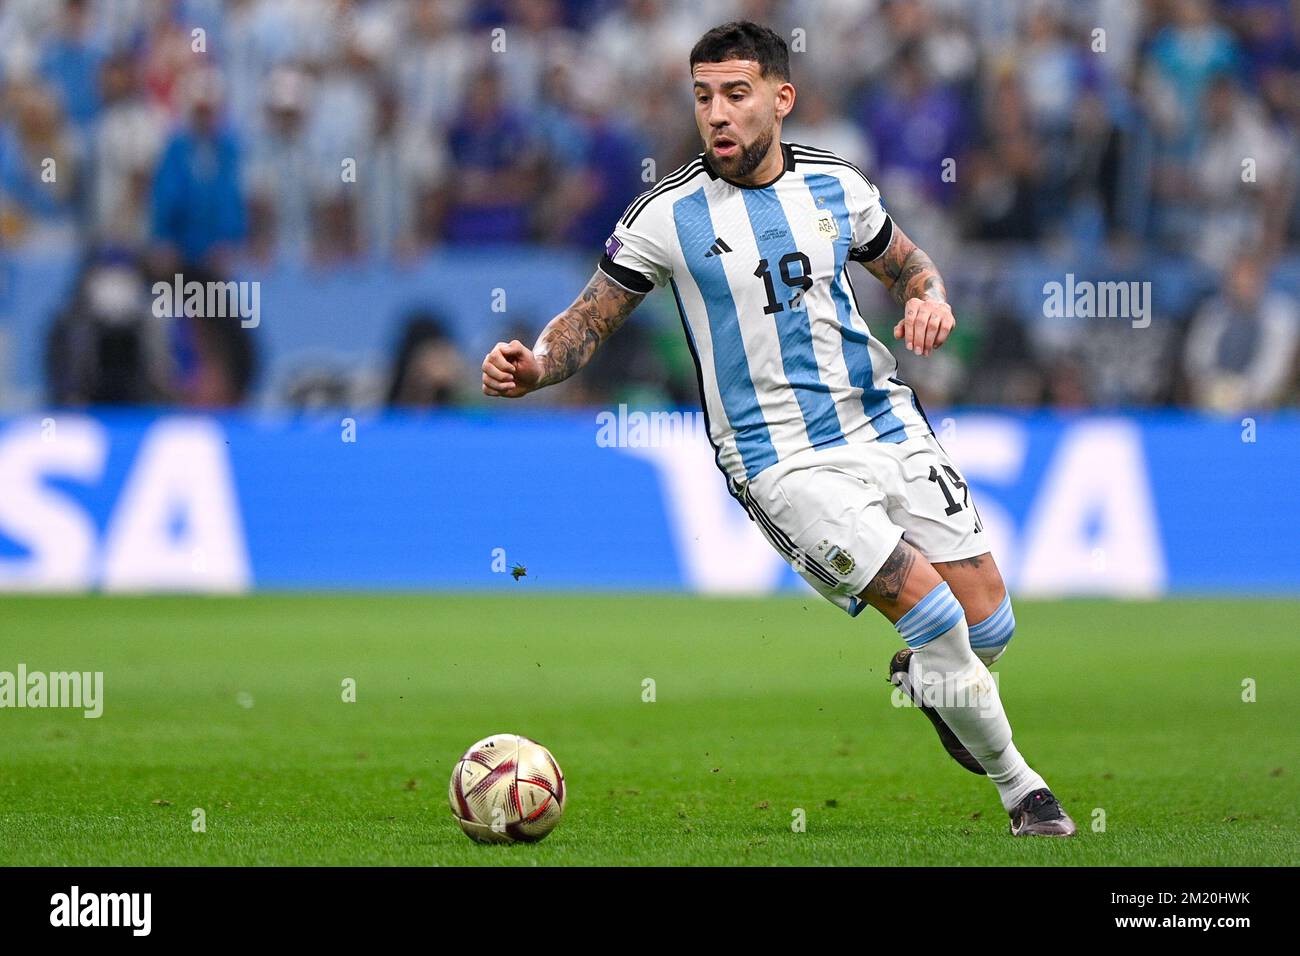 LUSAIL CITY, QATAR - DECEMBER 13: Nicolas Otamendi of Argentina in action during the Semi Final - FIFA World Cup Qatar 2022 match between Argentina and Croatia at the Lusail Stadium on December 13, 2022 in Lusail City, Qatar (Photo by Pablo Morano/BSR Agency) Stock Photo